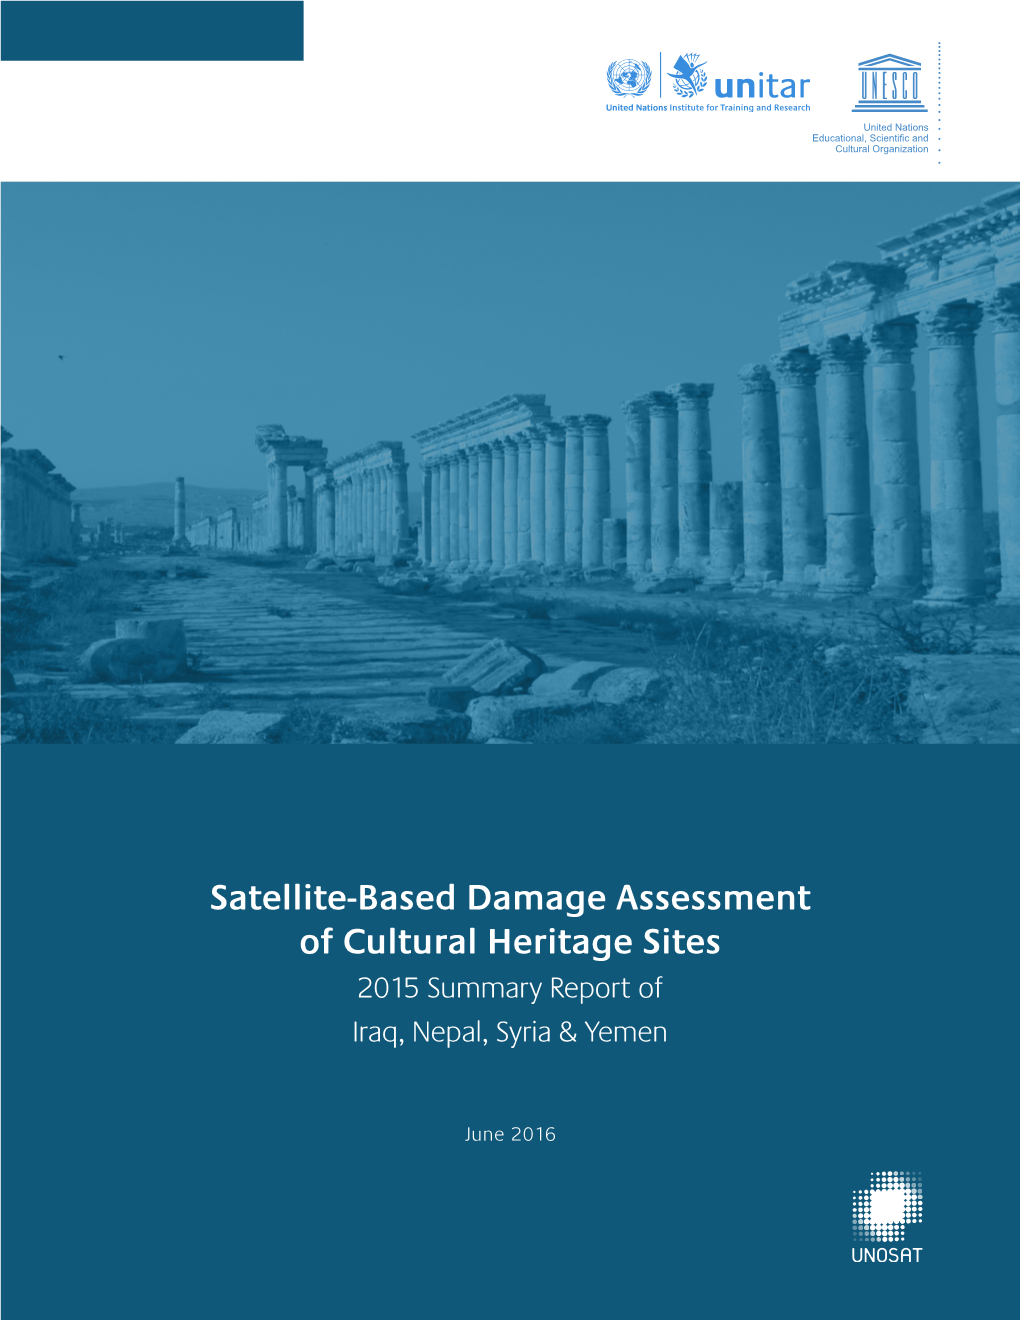 Satellite-Based Damage Assessment of Cultural Heritage Sites 2015 Summary Report of Iraq, Nepal, Syria & Yemen